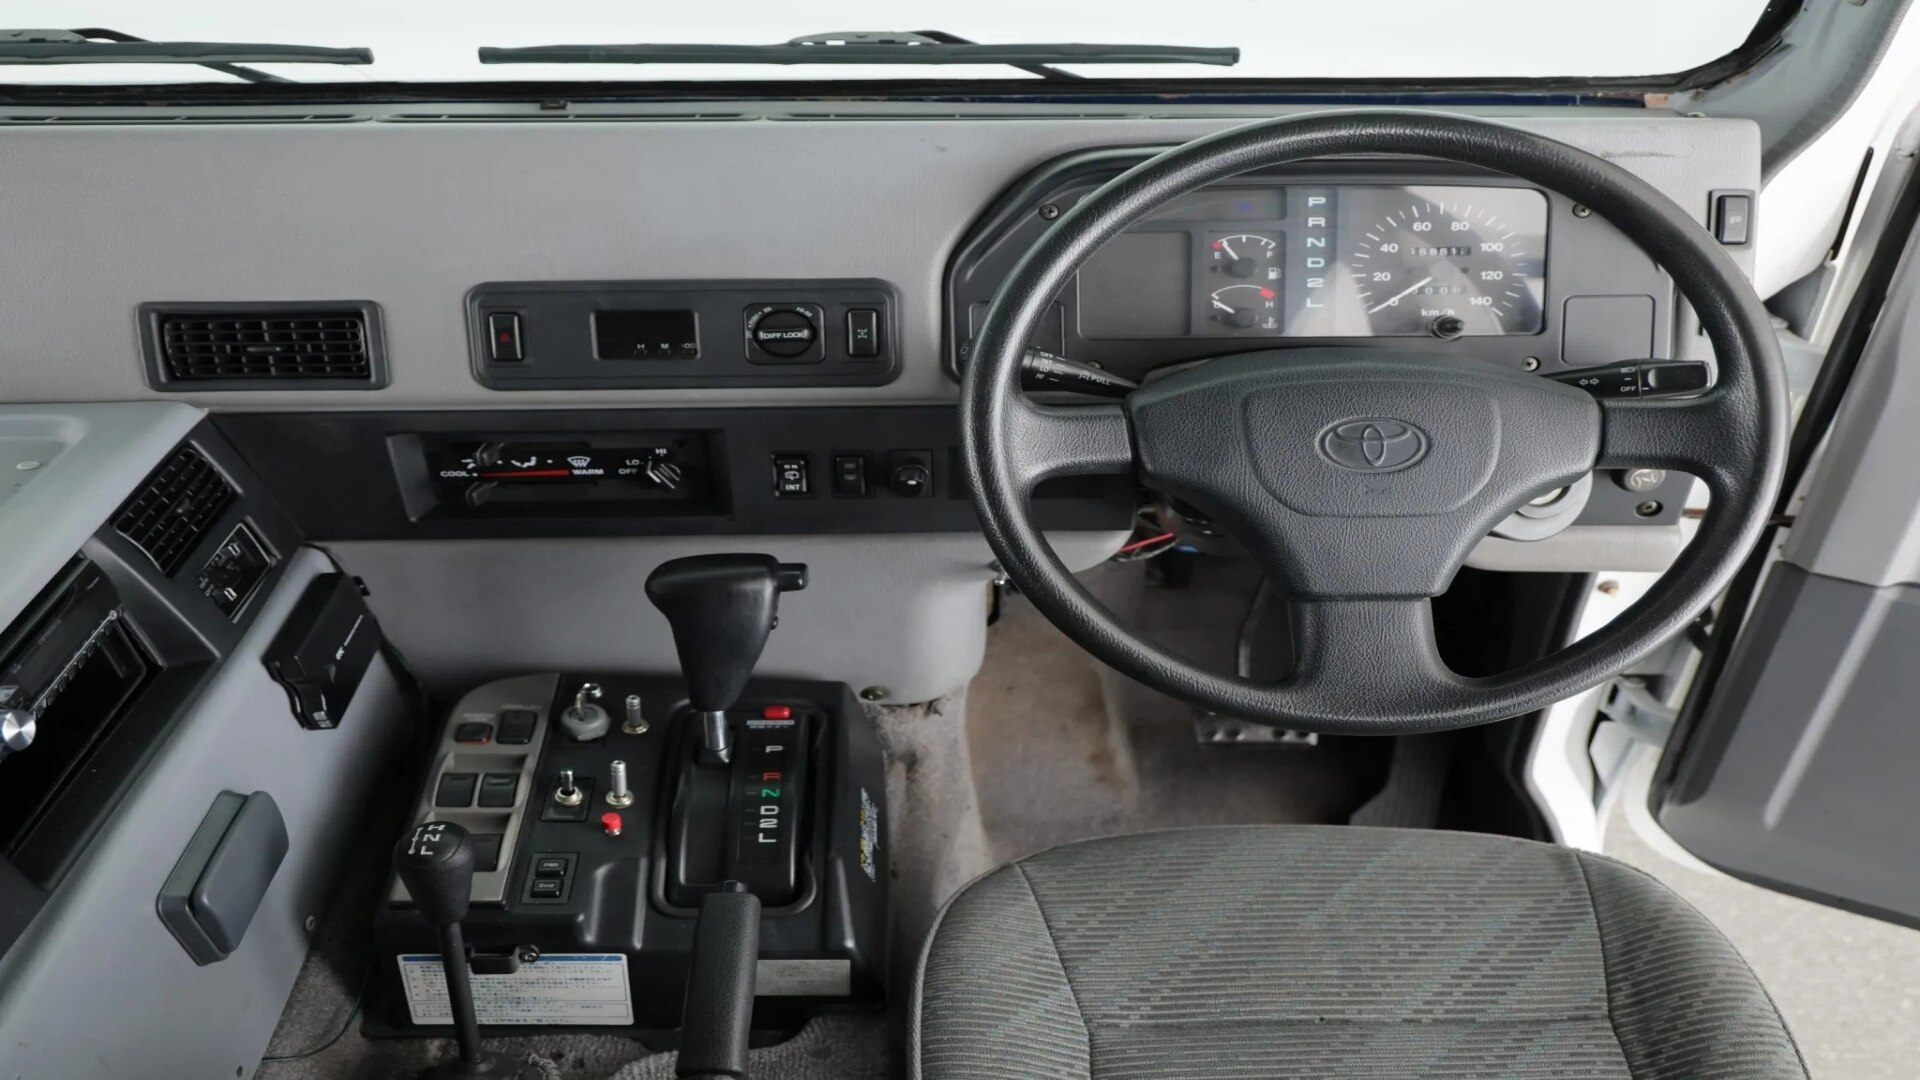 The Steering And Dashboard Of A Toyota Mega Cruiser (Credits Bring a Trailer)